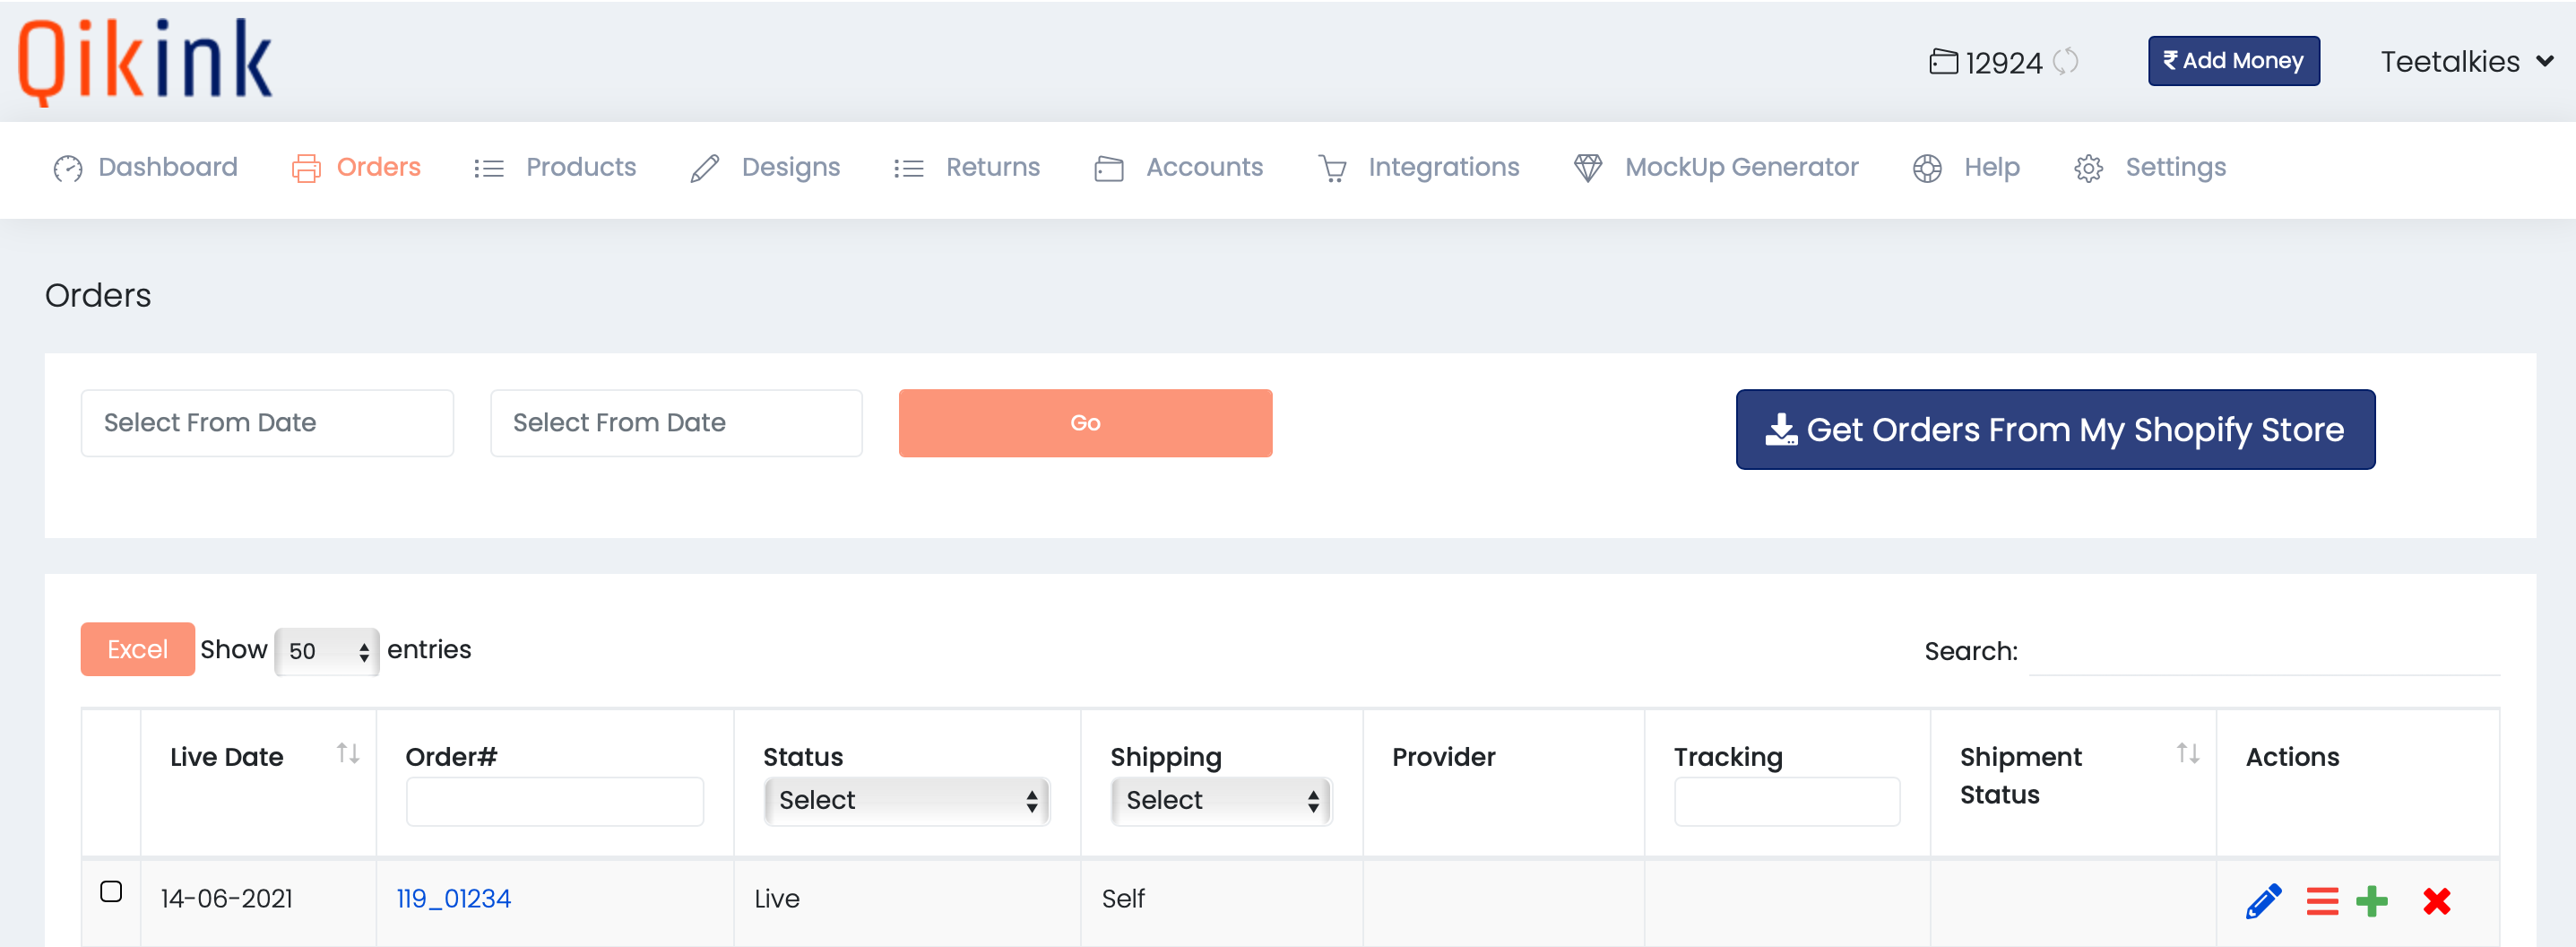 orders tab from qikink dashboard to upload self shipping label